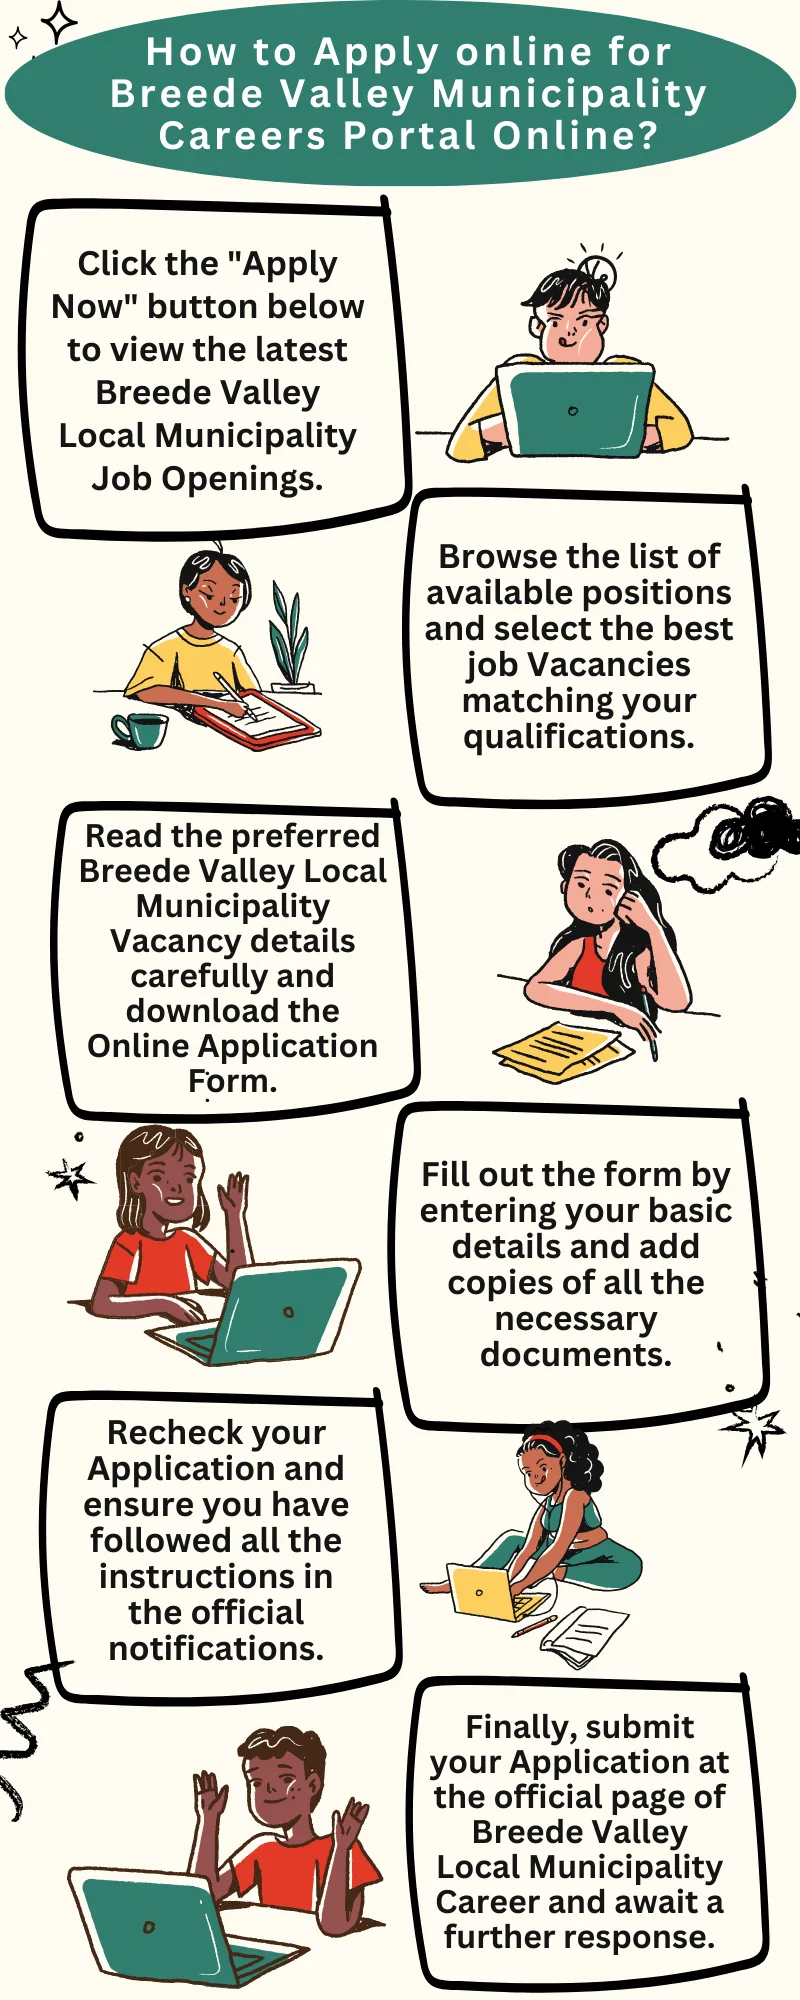 How to Apply online for Breede Valley Municipality Careers Portal Online_